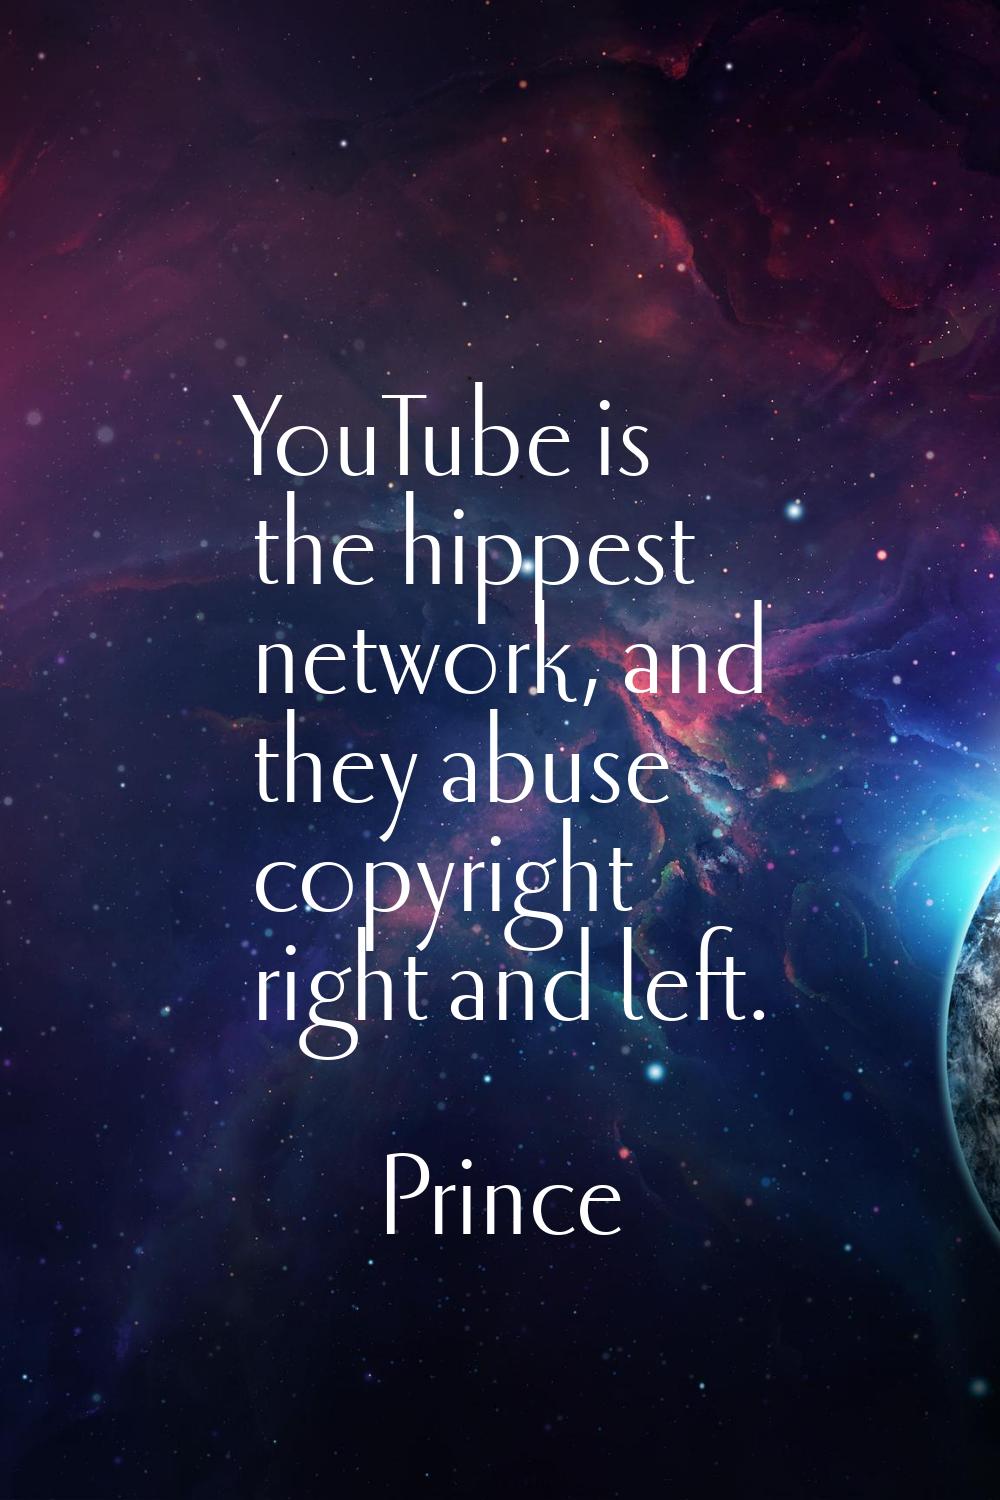 YouTube is the hippest network, and they abuse copyright right and left.